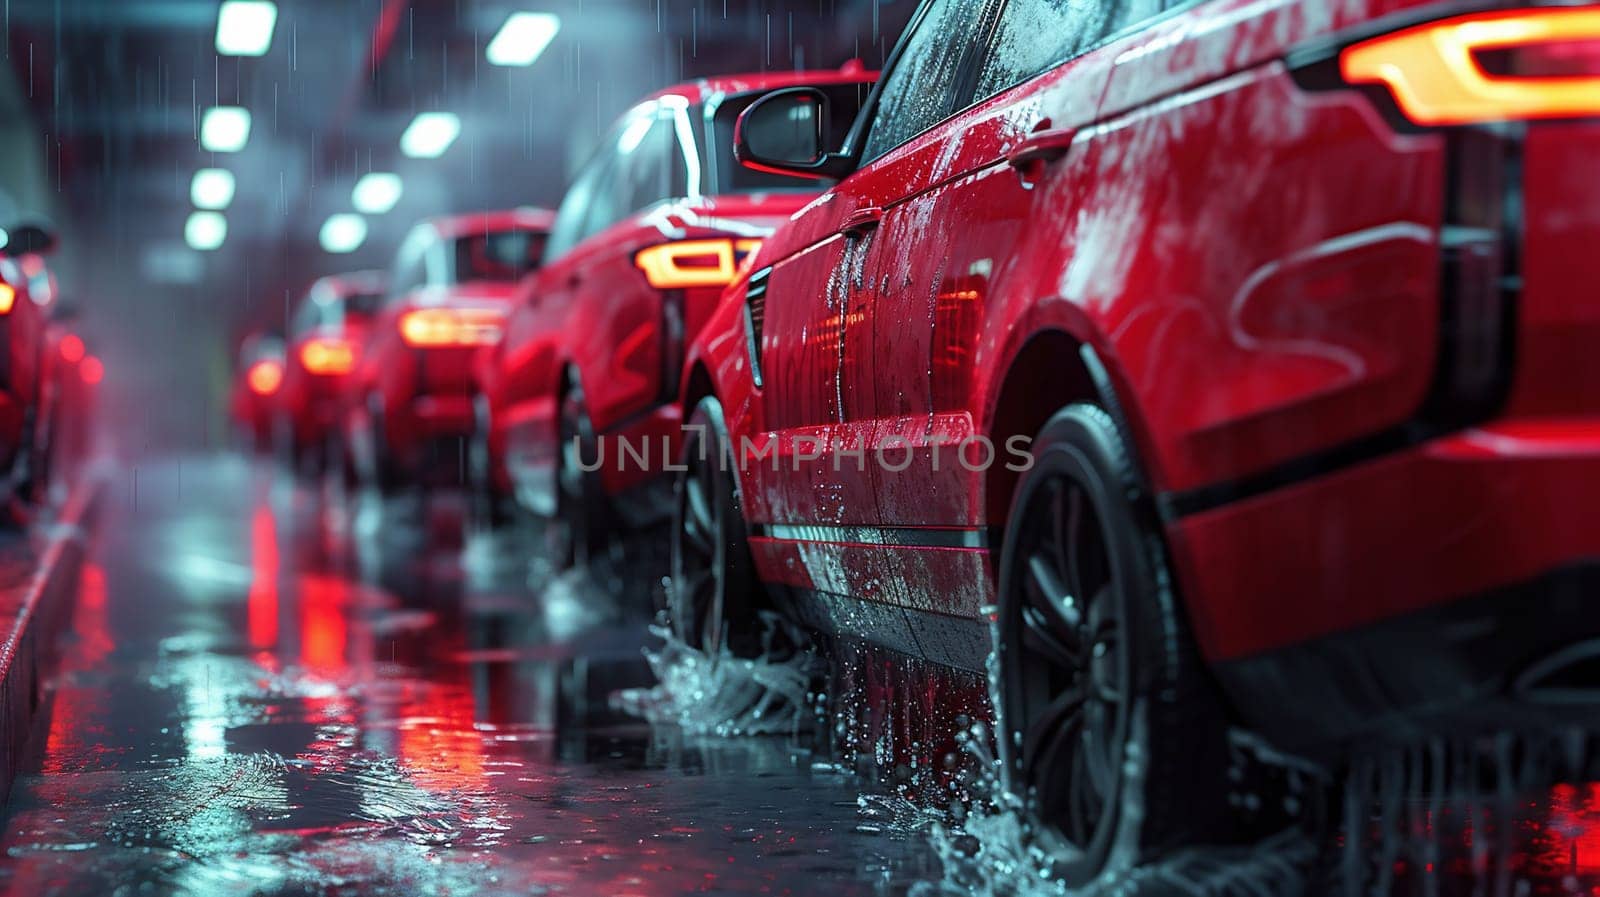 Hard rain fall at night with blurry cars as background. High quality photo